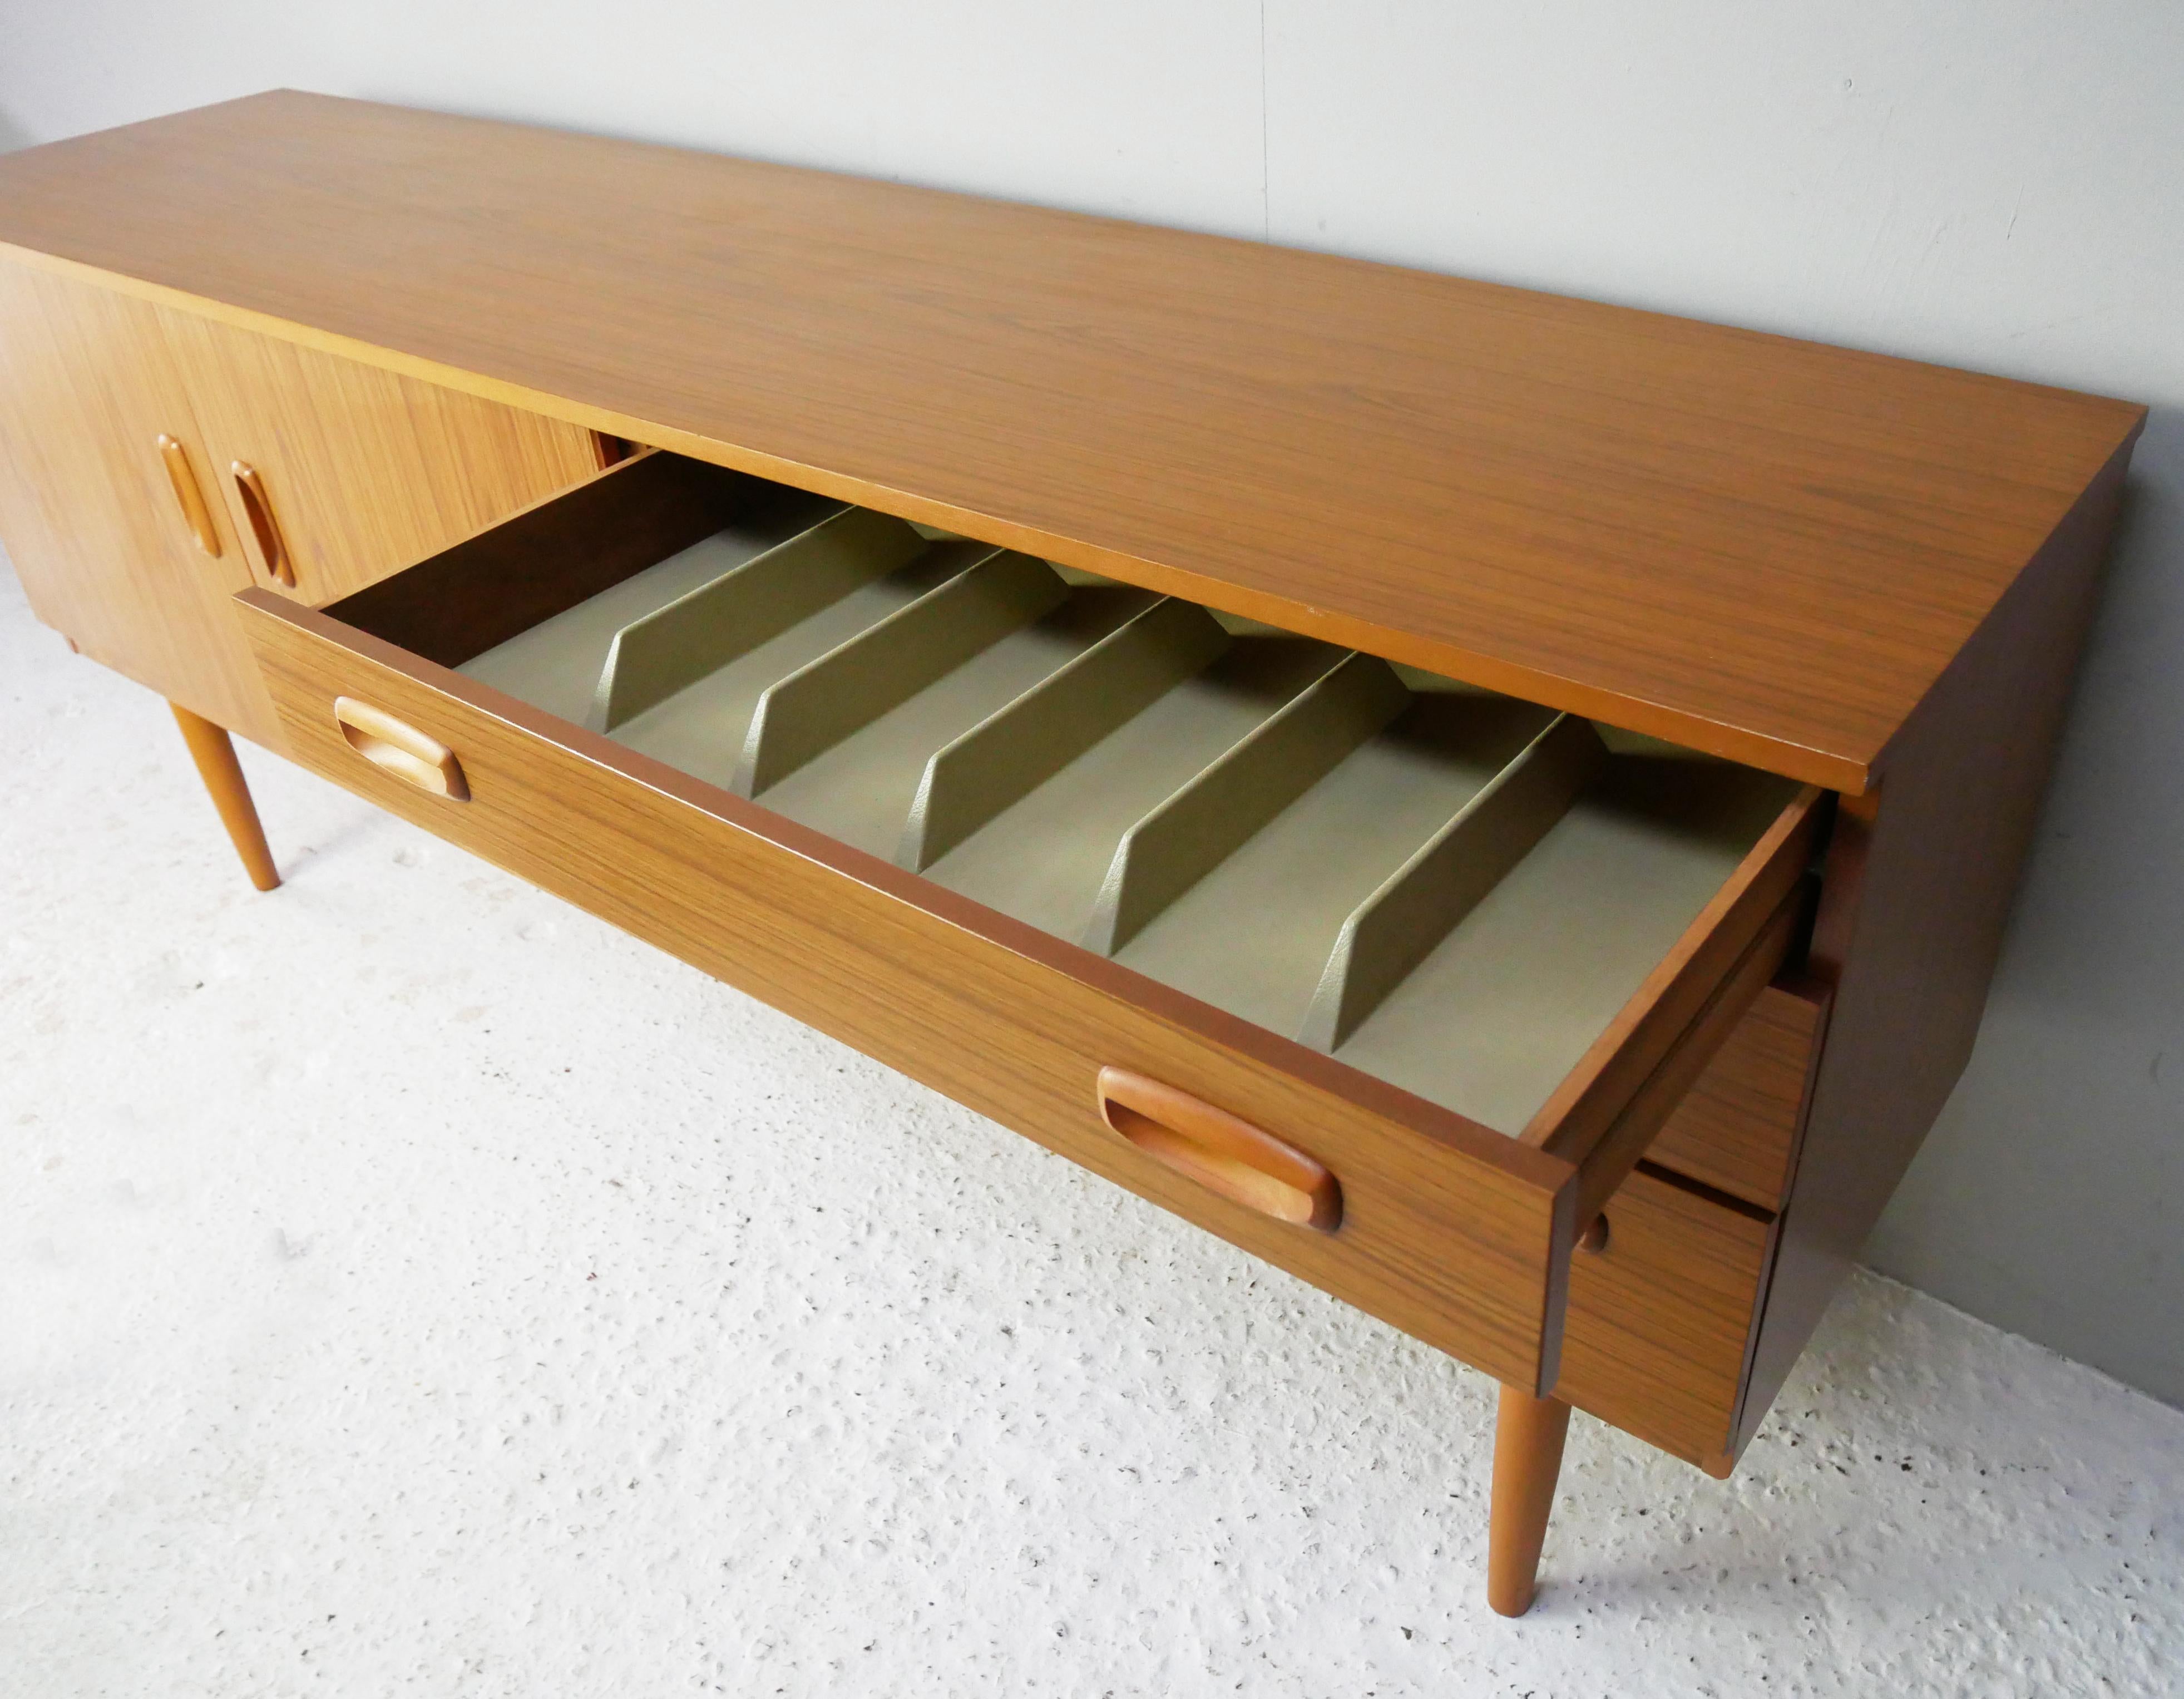 Schreiber was once a household name with shops all over the UK including Tottenham Court Road. The design philosophy was affordable well designed Scandinavian style. 

The furniture was finished in a distinctive Formica like veneer. 

This is an